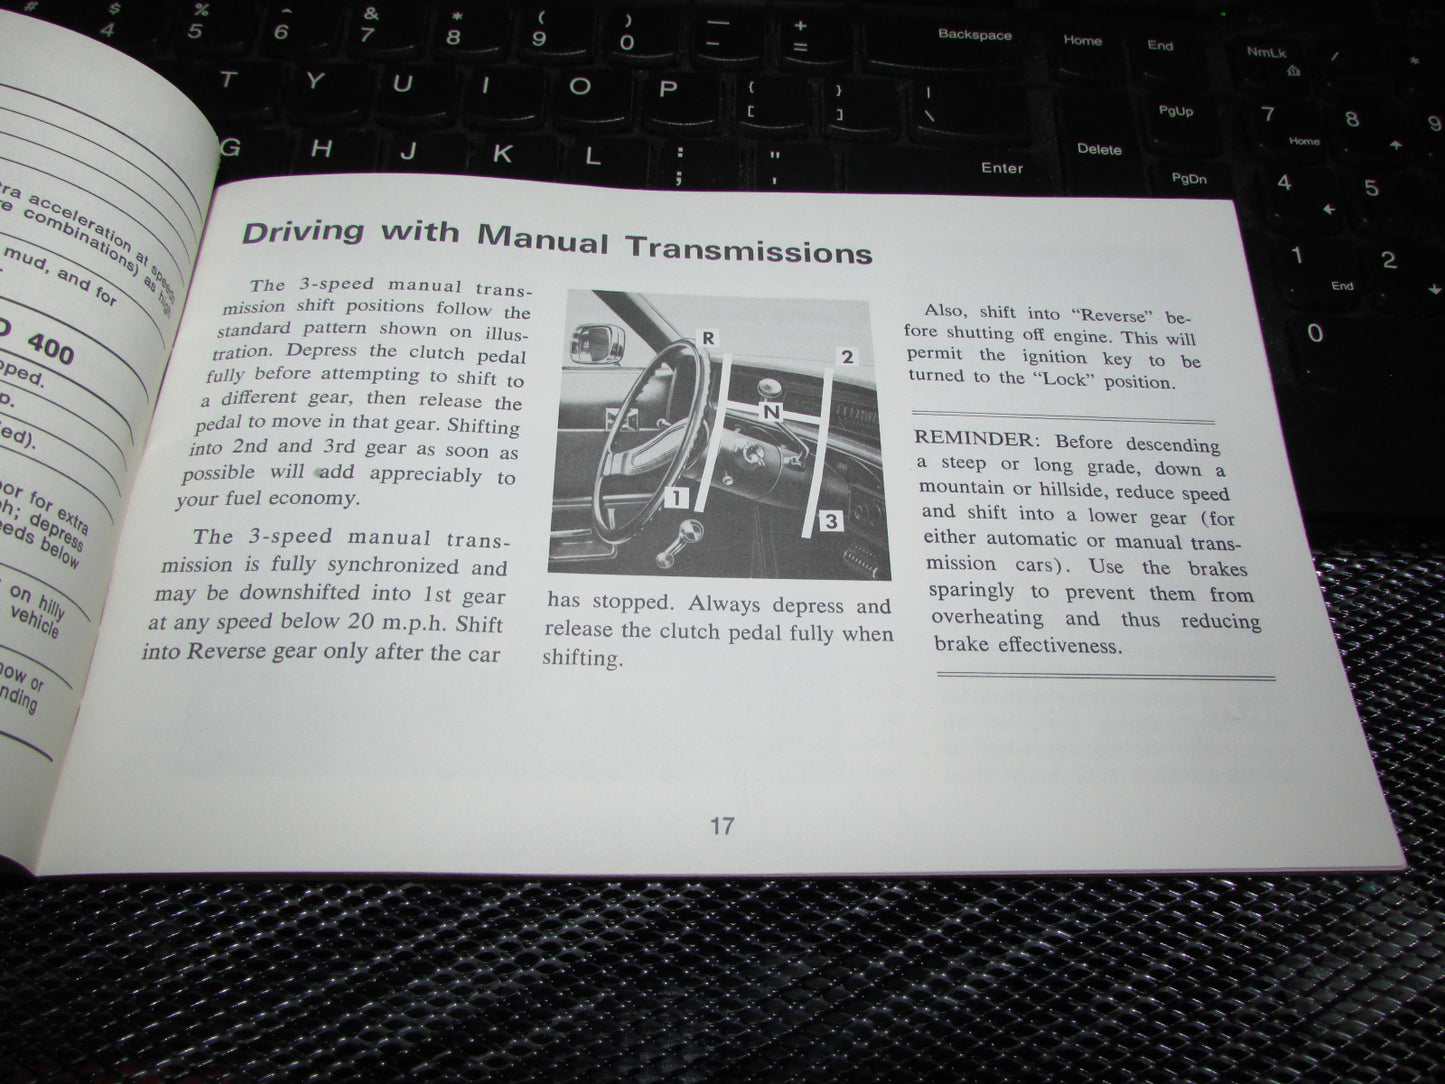 Chevrolet Station Wagon (1971) Owners Manual